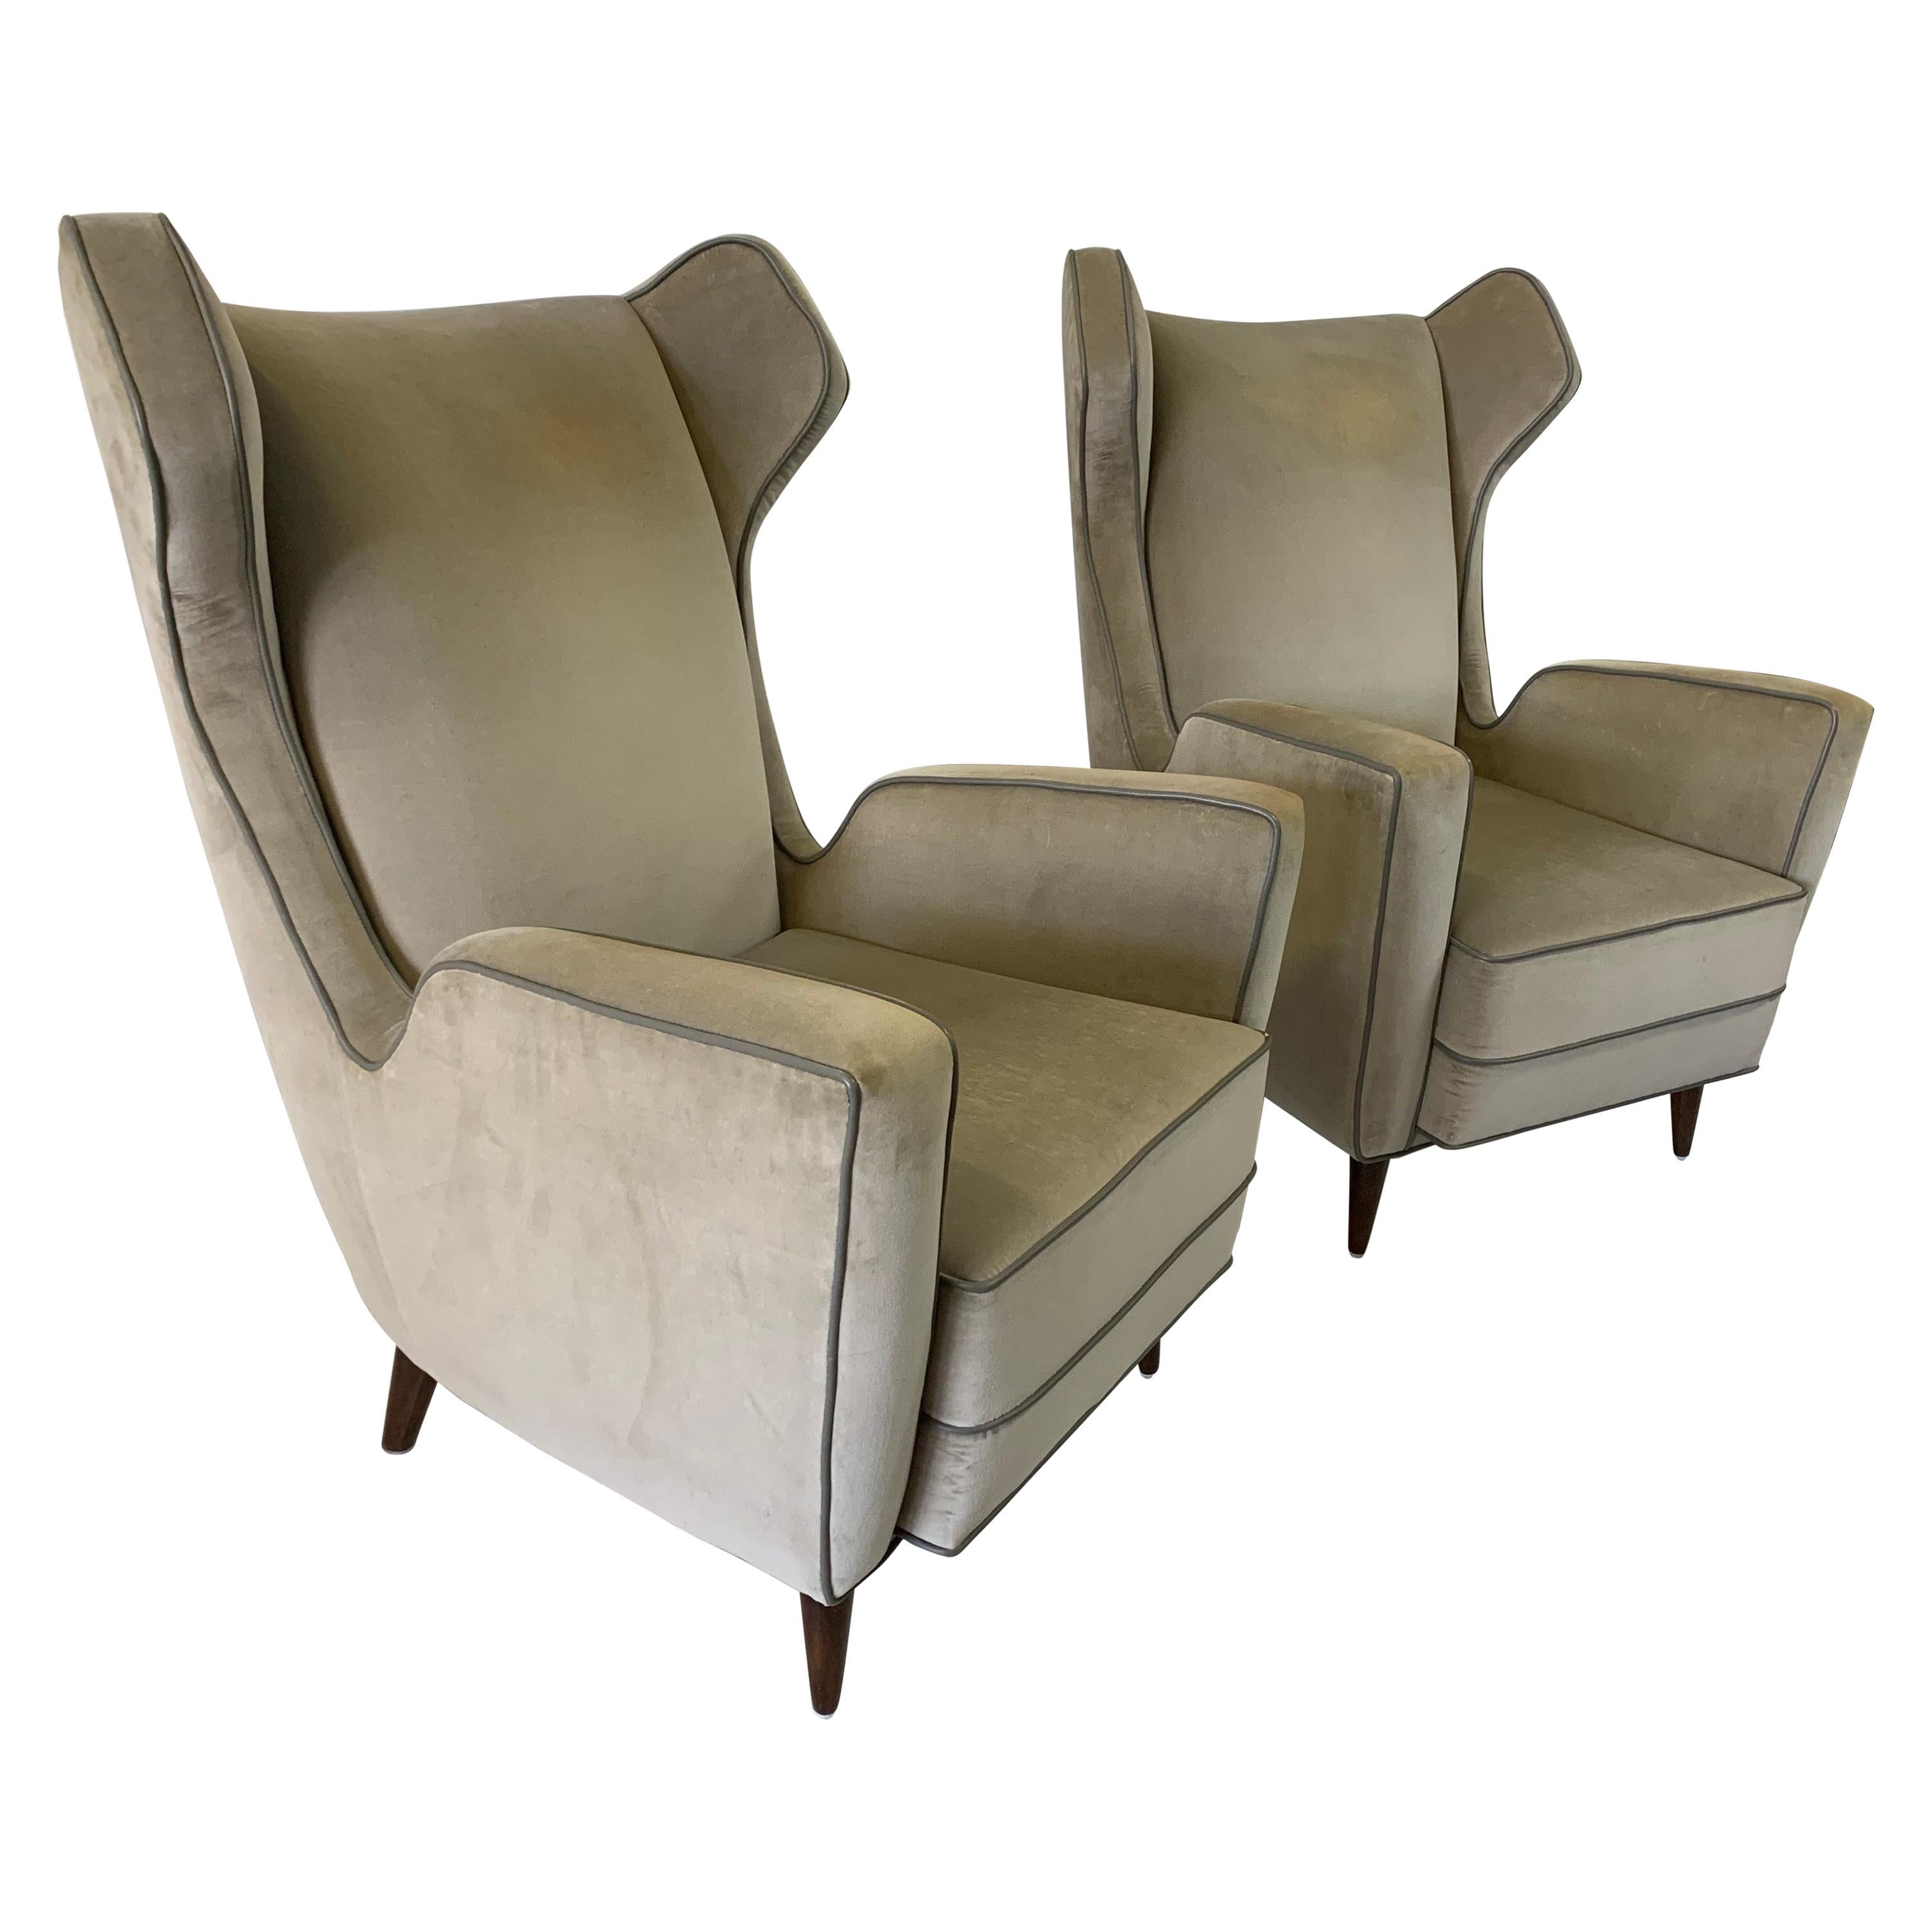 Italian Wing-Back Armchairs in the Style of Ponti, Pair For Sale